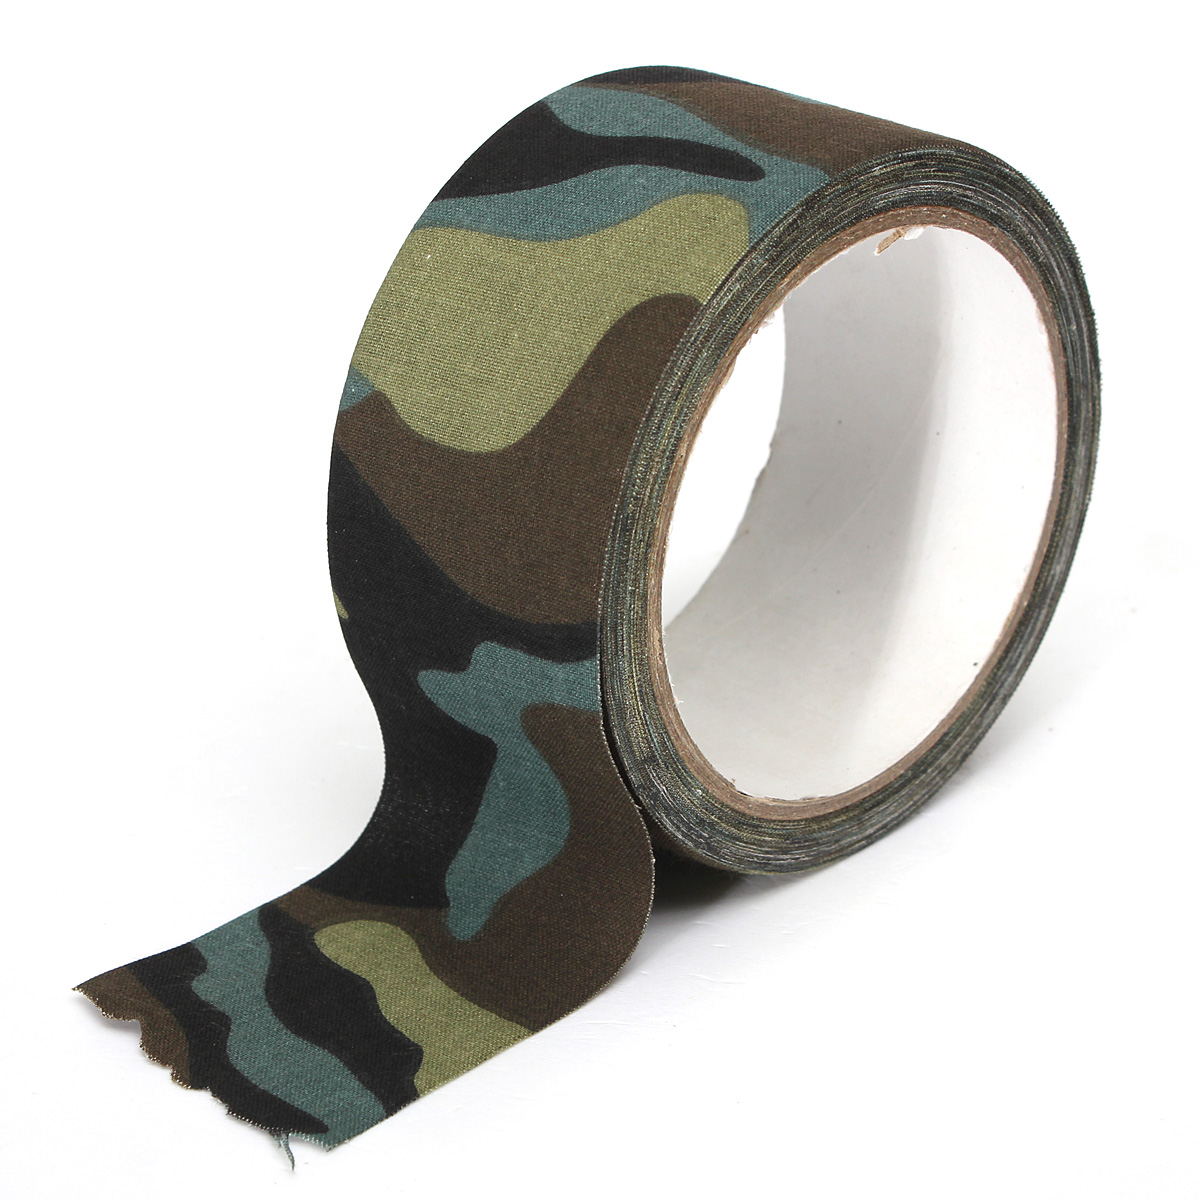 10M-Camouflage-Wrap-Tape-Camo-Tape-Duct-Waterproof-Mutifunctional-Fabric-Camping-Stealth-Tape-1310100-1